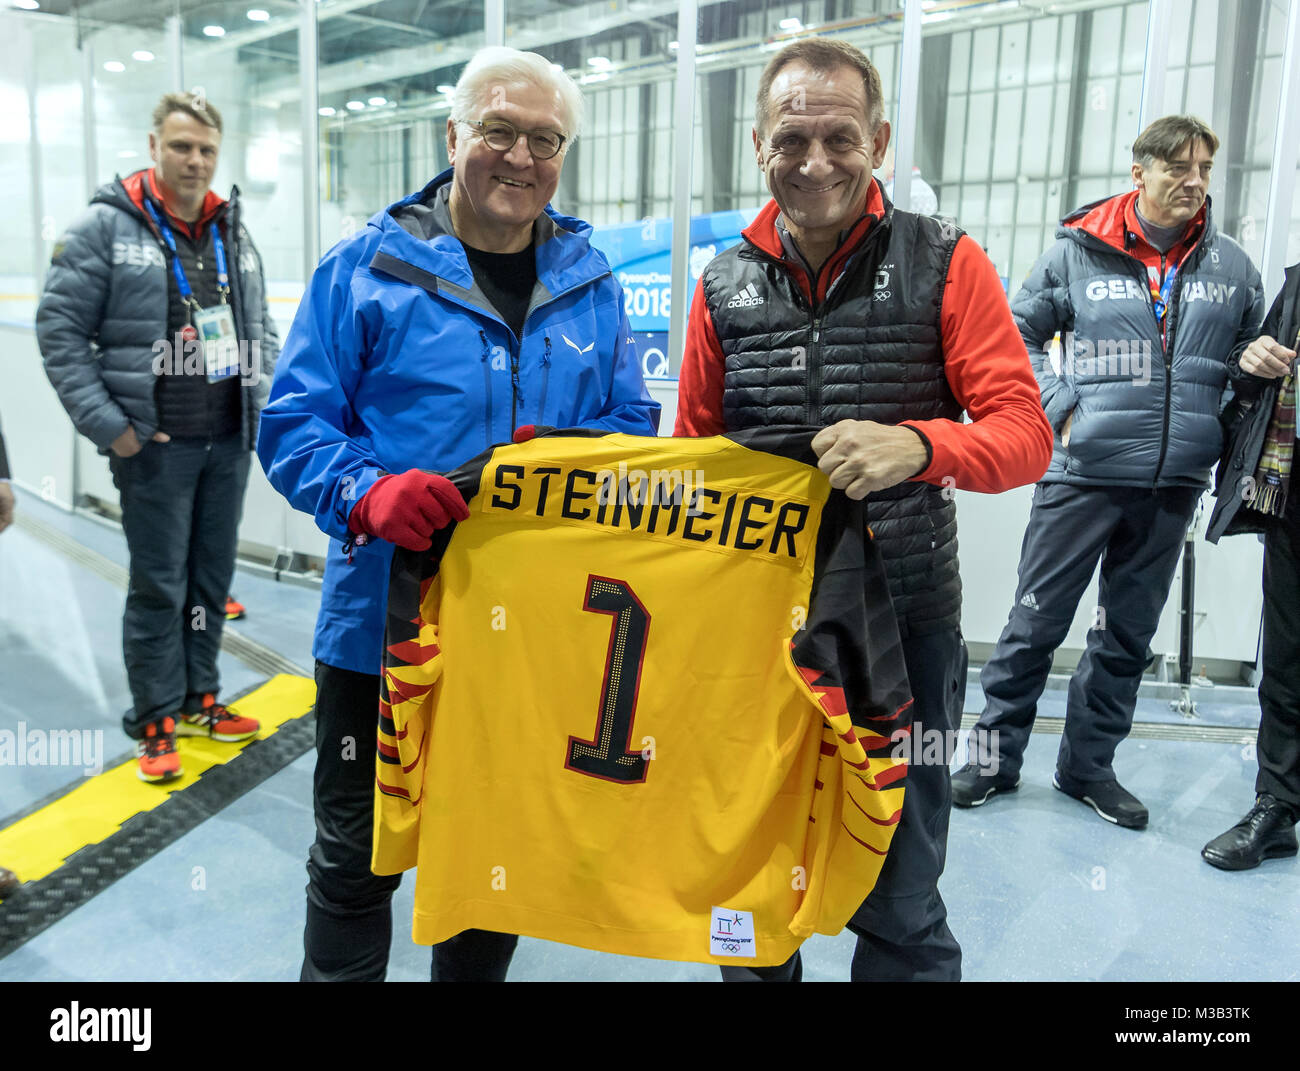 Gangneung, South Korea. 20th Feb, 2018. German President Frank-Walter Steinmeier (l) and President of the German Olympic Sports Association (DOSB) Alfons Hoermann hold up the German ice hockey team's jersey at a training session for the Pyeongchang Winter Olympics in Gangneung, South Korea, 20 February 2018. Credit: Peter Kneffel/dpa/Alamy Live News Stock Photo